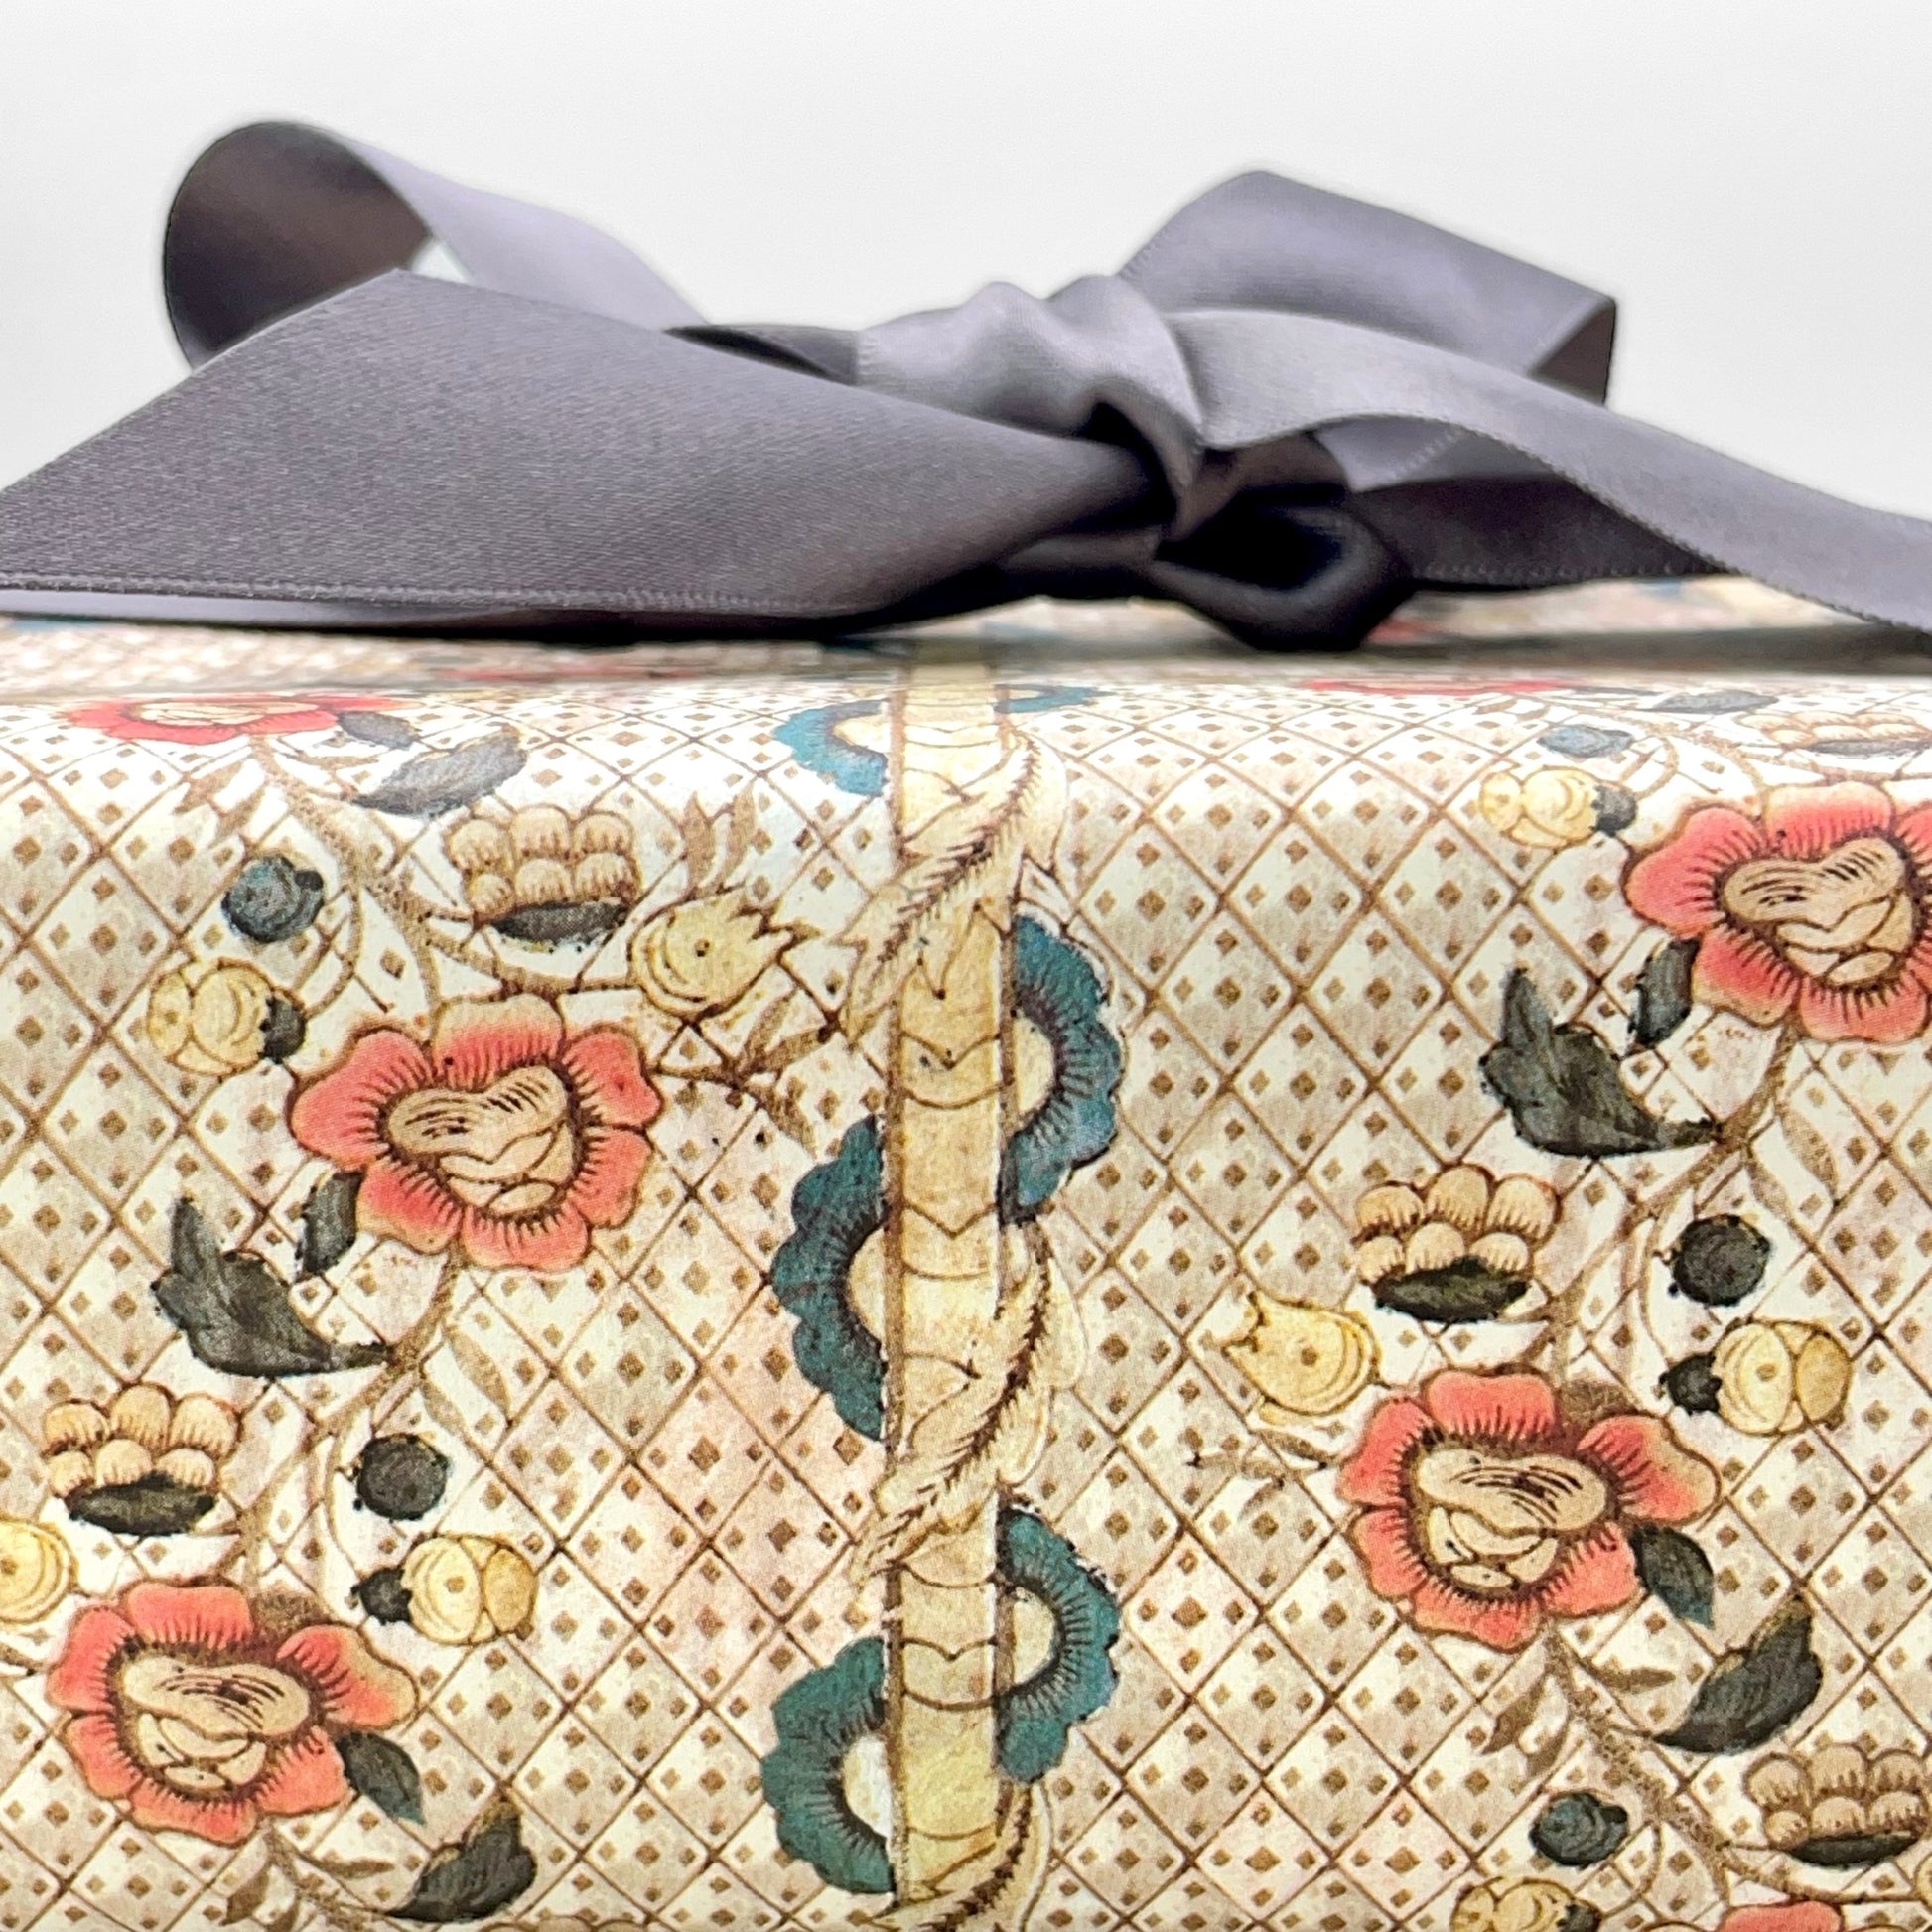 Remondini Italian patterned wrapping paper by Tassotti, A detailed trellis design with flowers in taupe, rose and aqua colours. Pictured wrapped with a grey ribbon bow. Close up